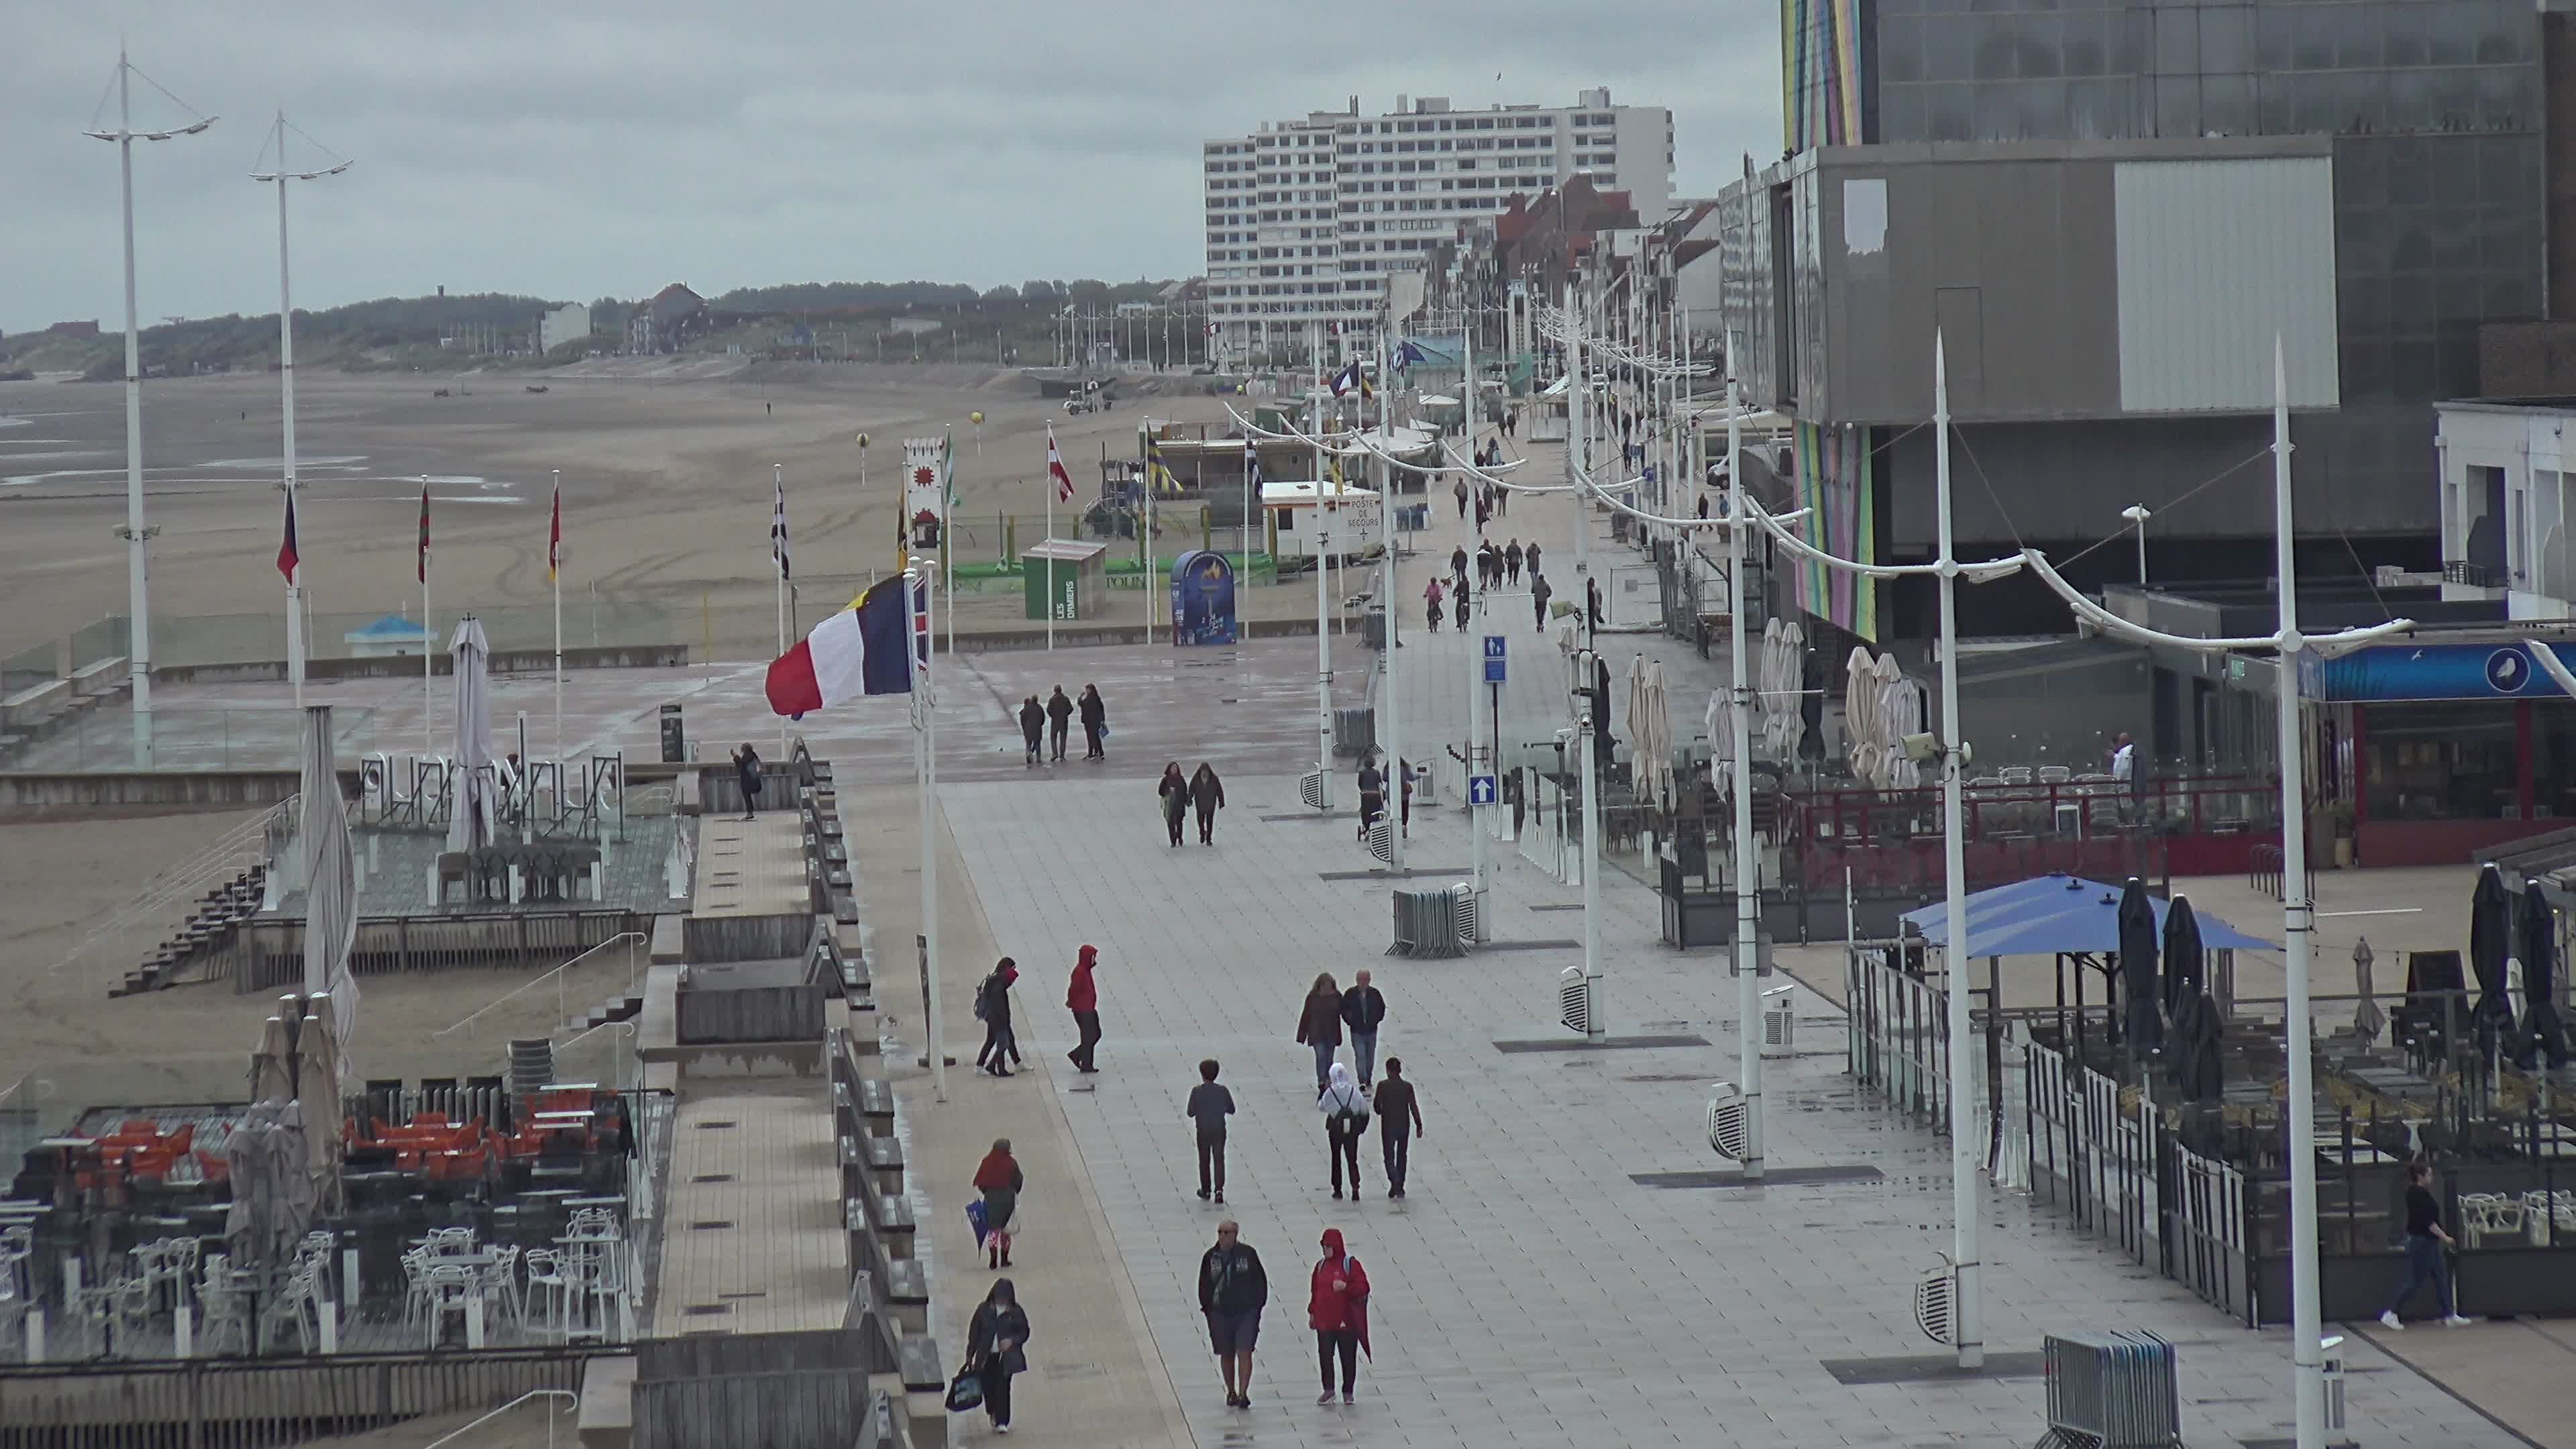 Dunkerque Fre. 14:34